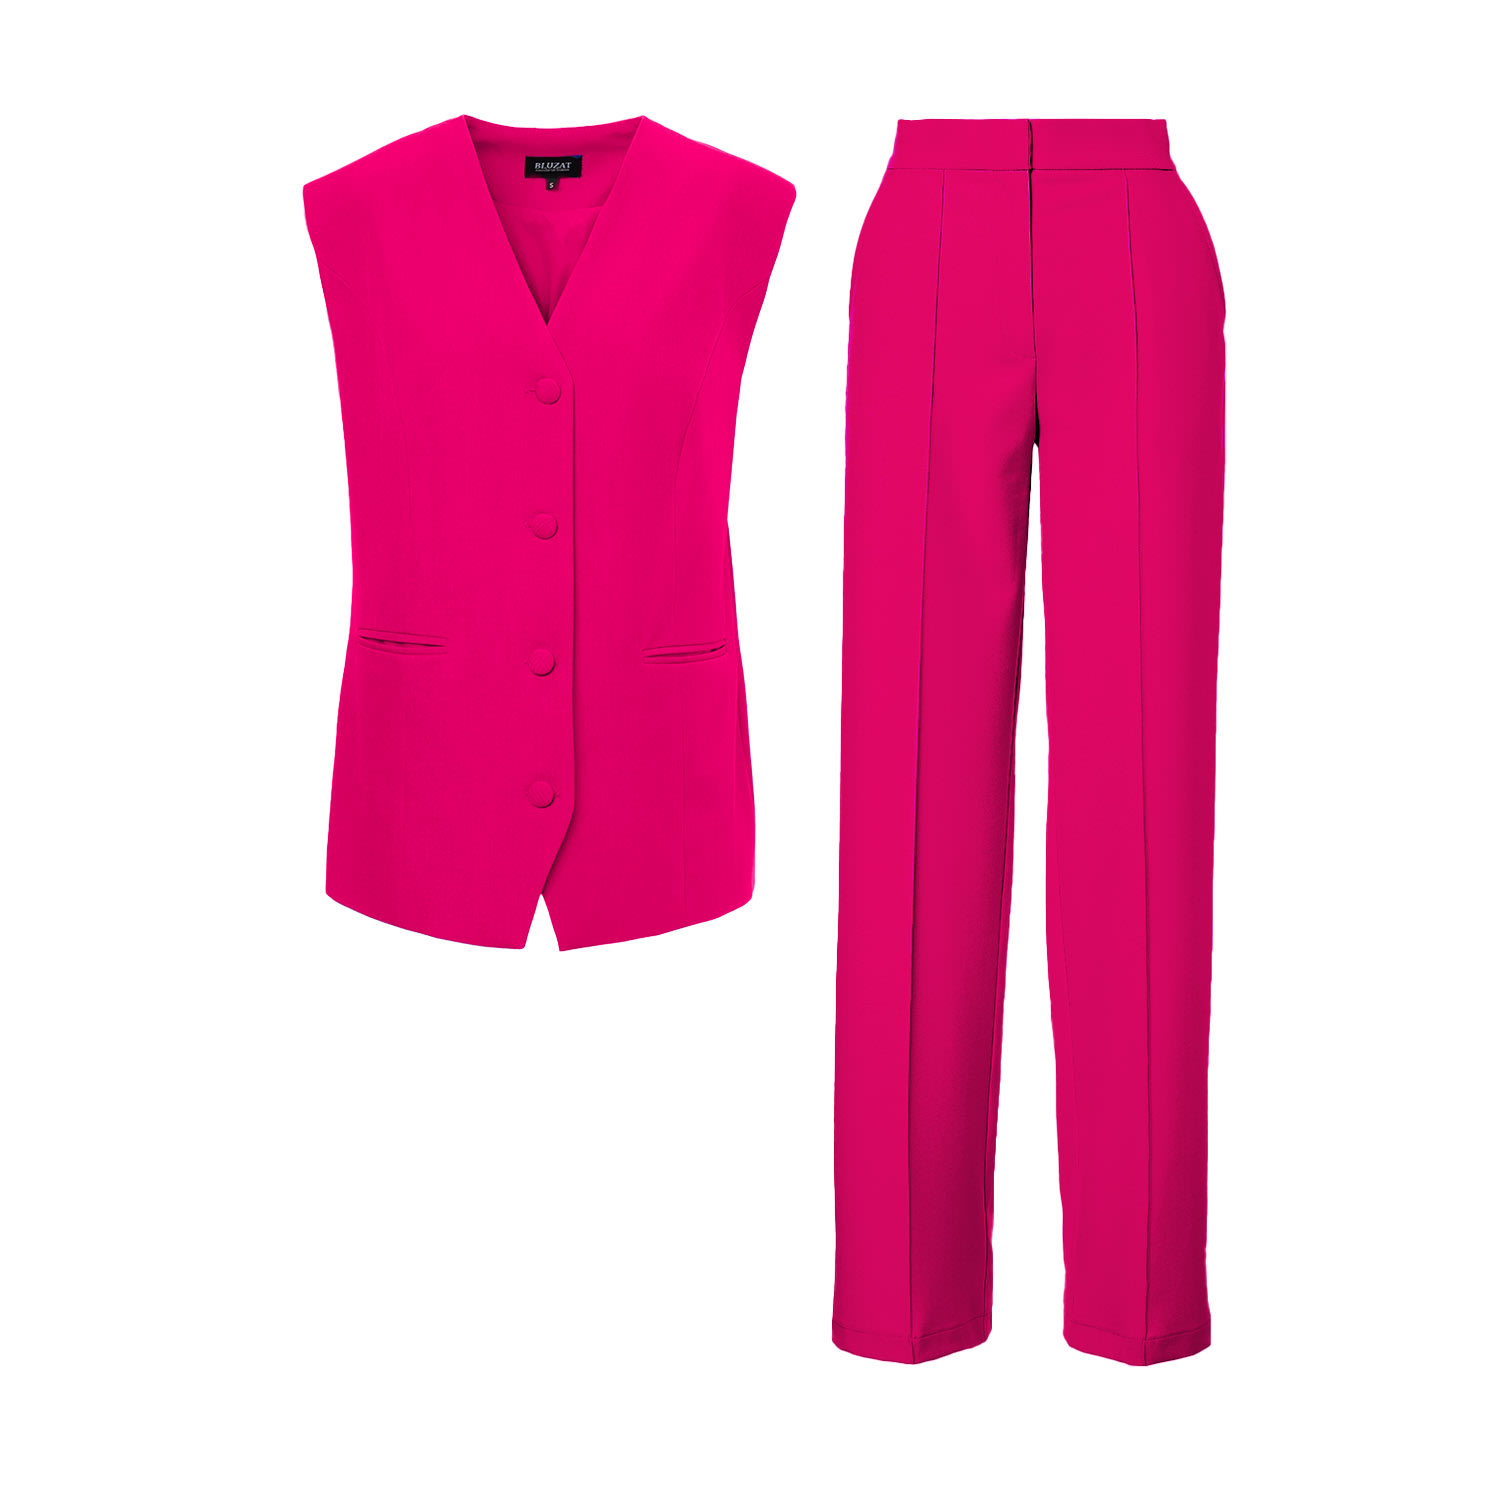 Women’s Pink / Purple Fuchsia Suit With Oversized Vest And Stripe Detail Trousers Extra Small Bluzat